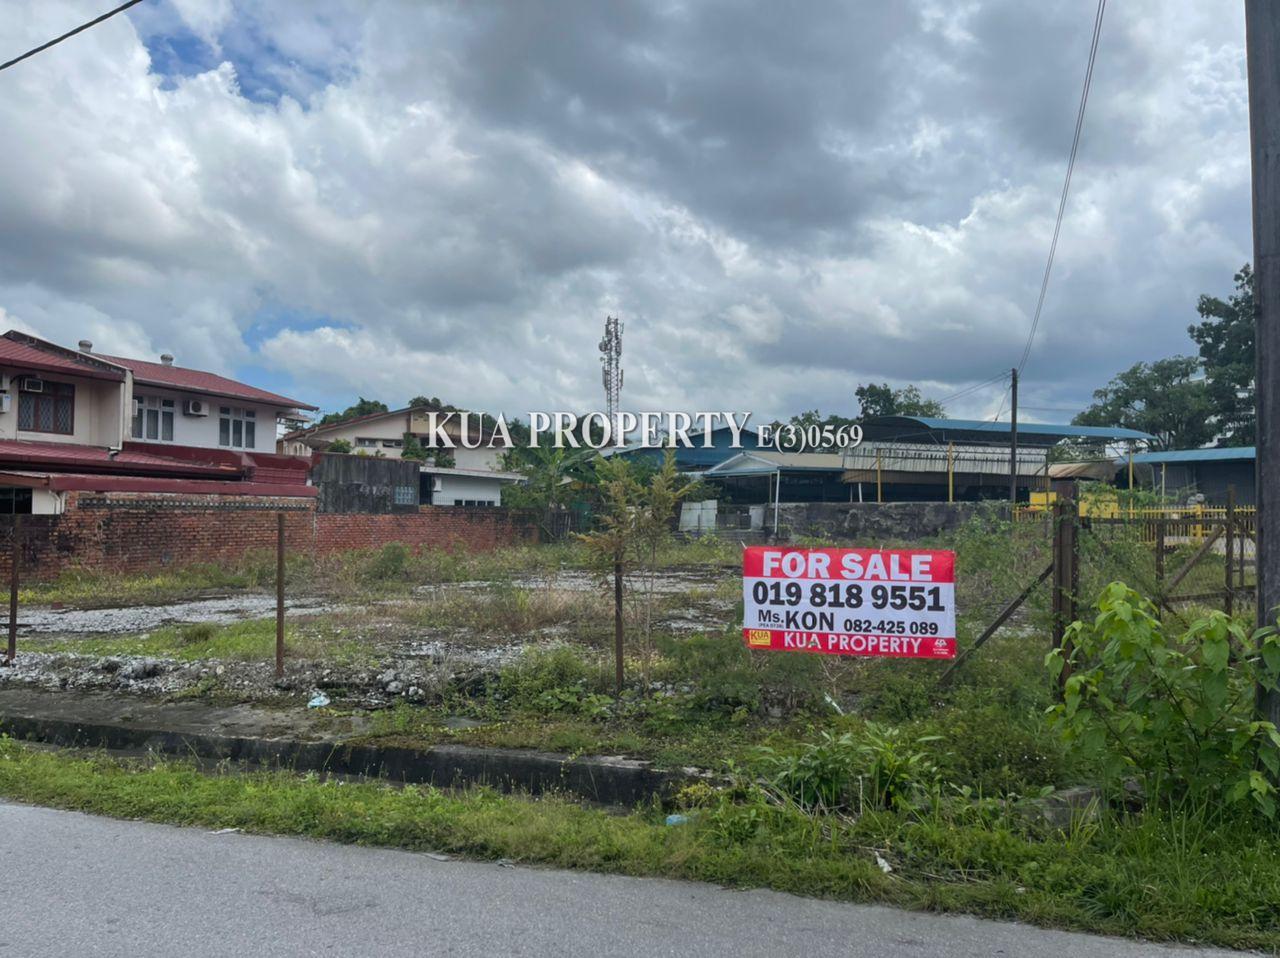 Detached land For Sale! Located at Jalan Benggang cum Hup Kee near to Windsor Estate